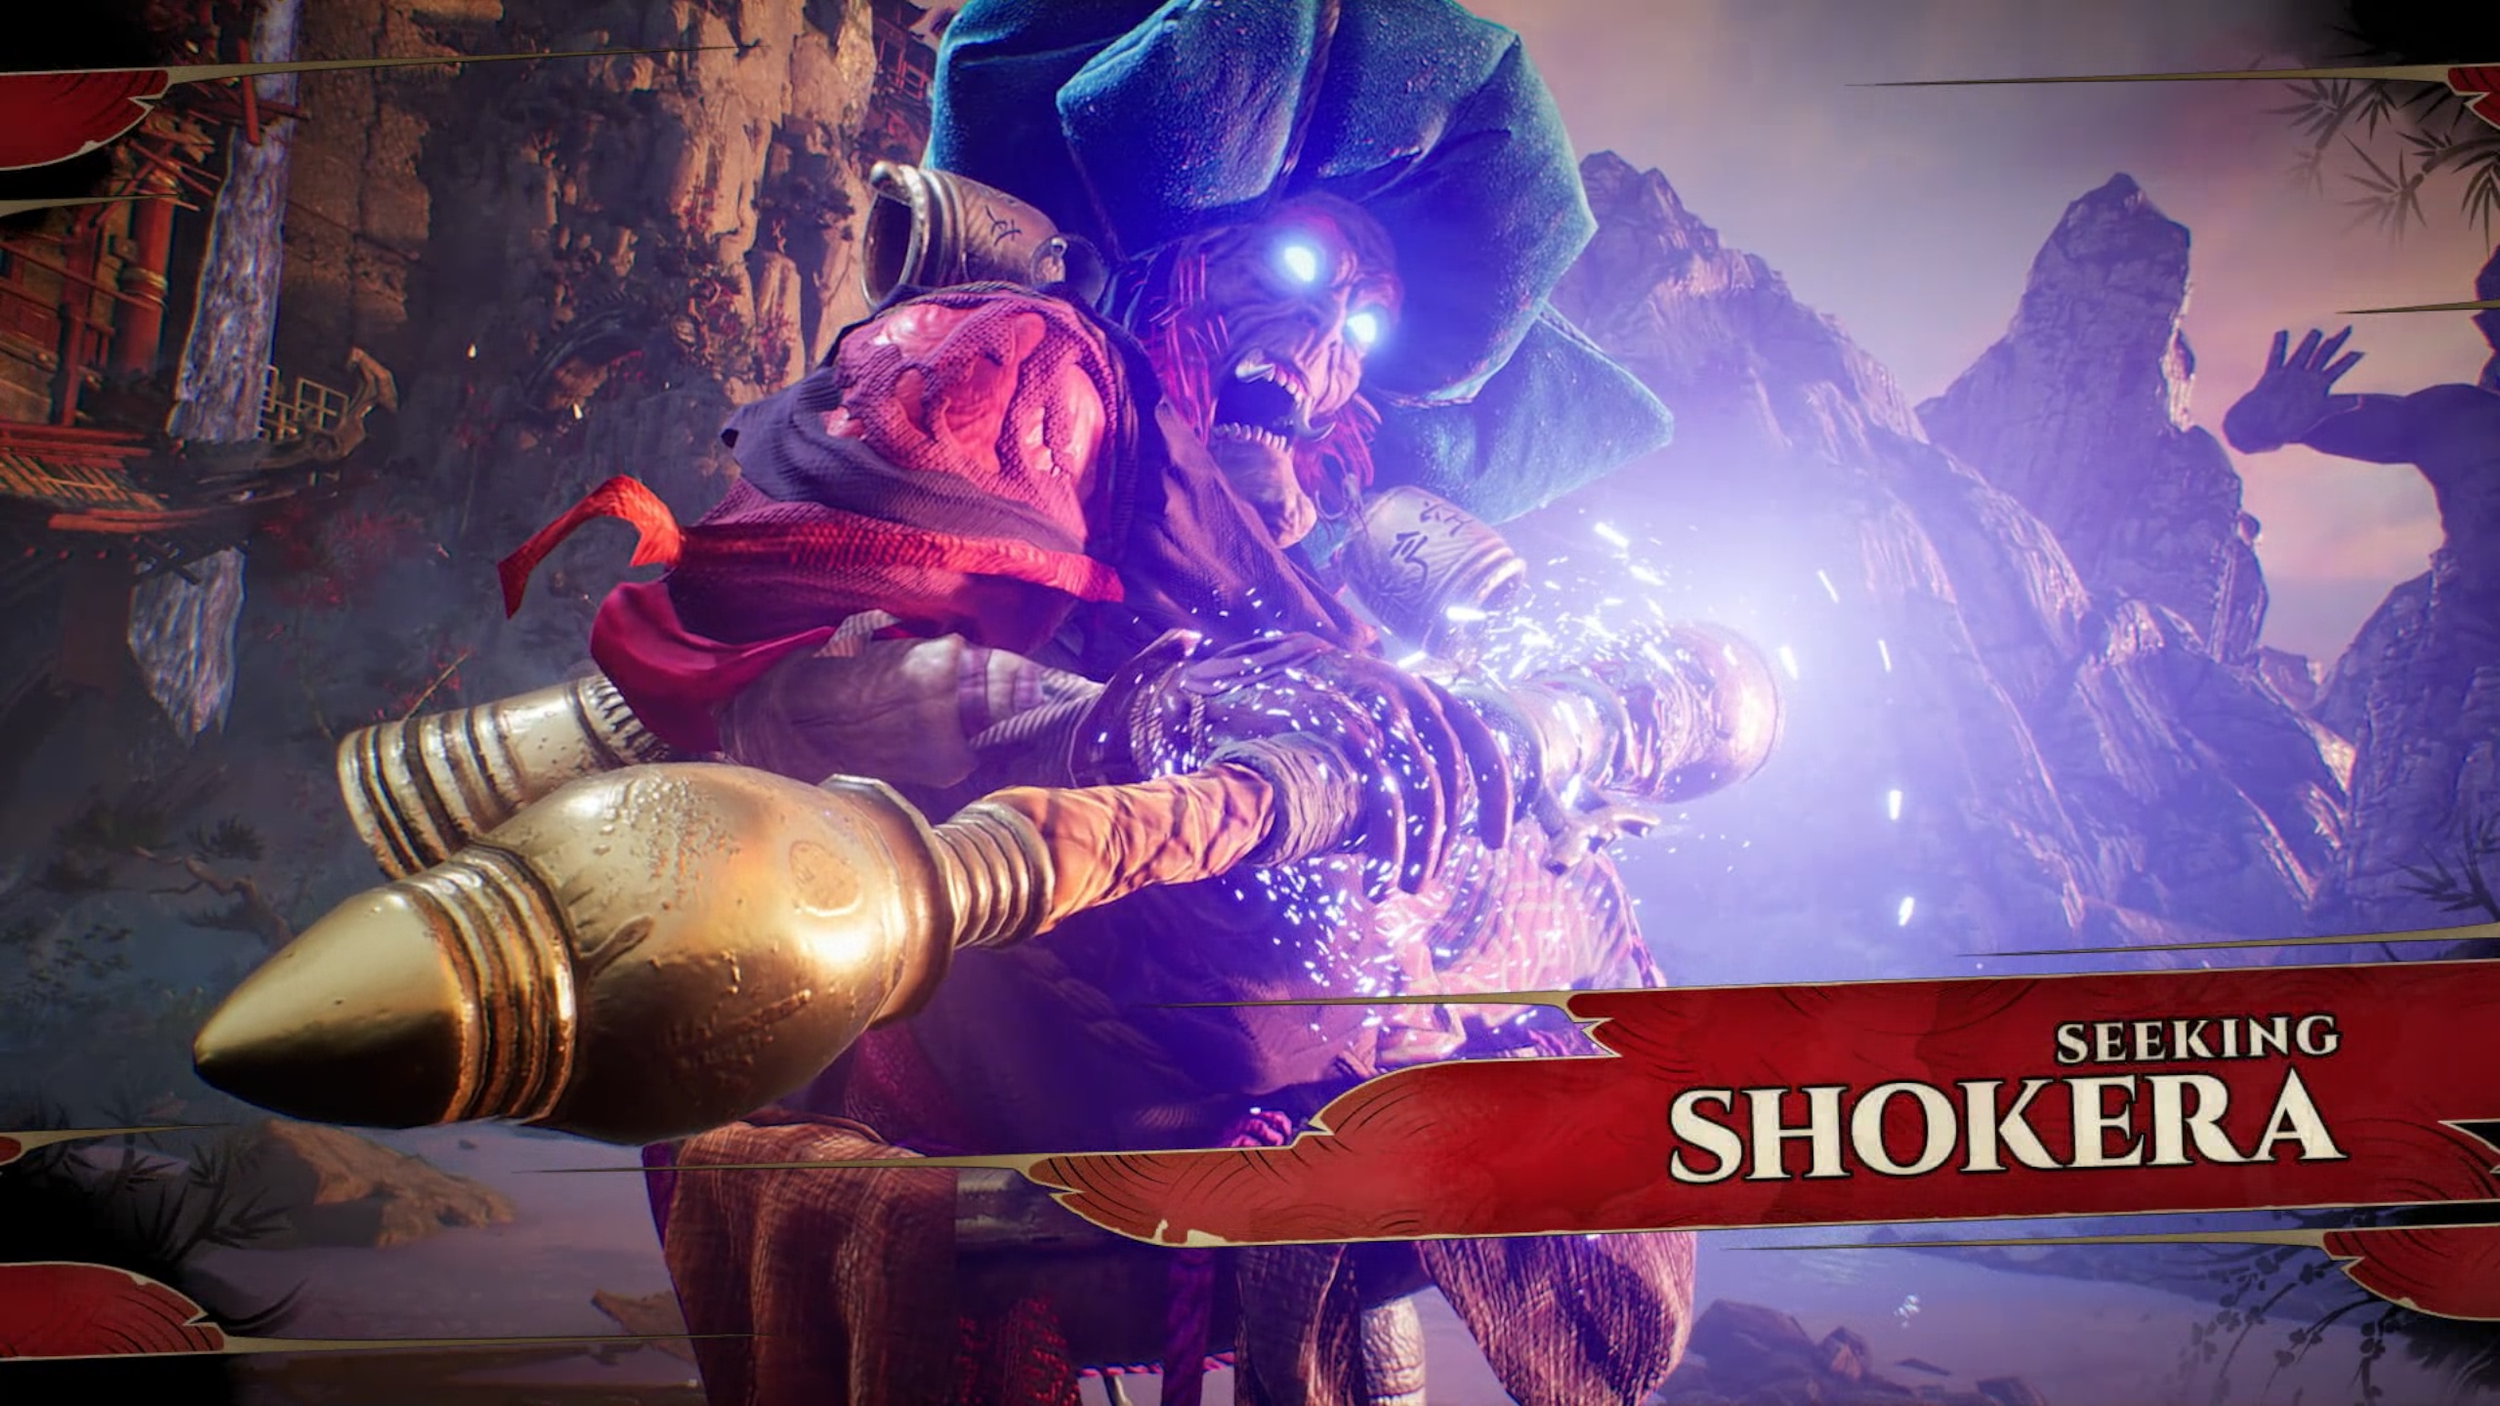 Shadow Warrior 3: a great game let down by frustrating technical issues